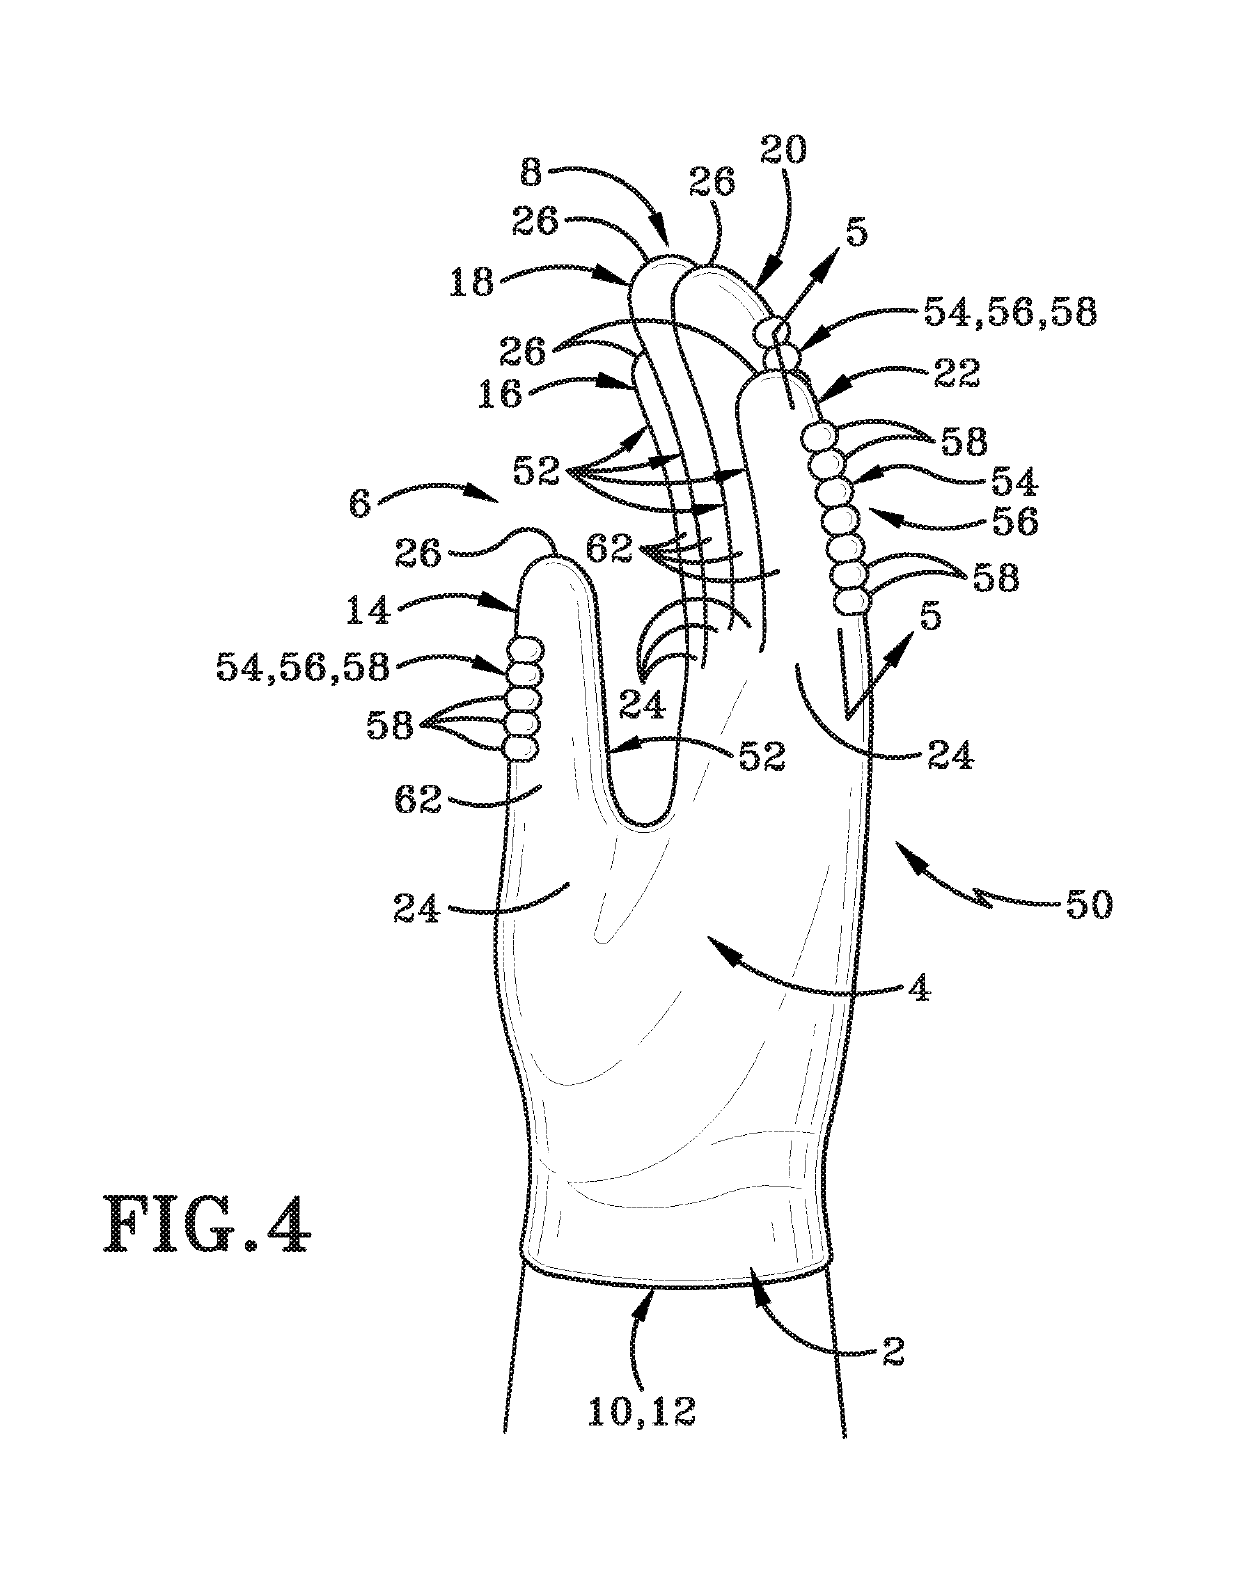 Glove with fingertip regions of a reduced circumference